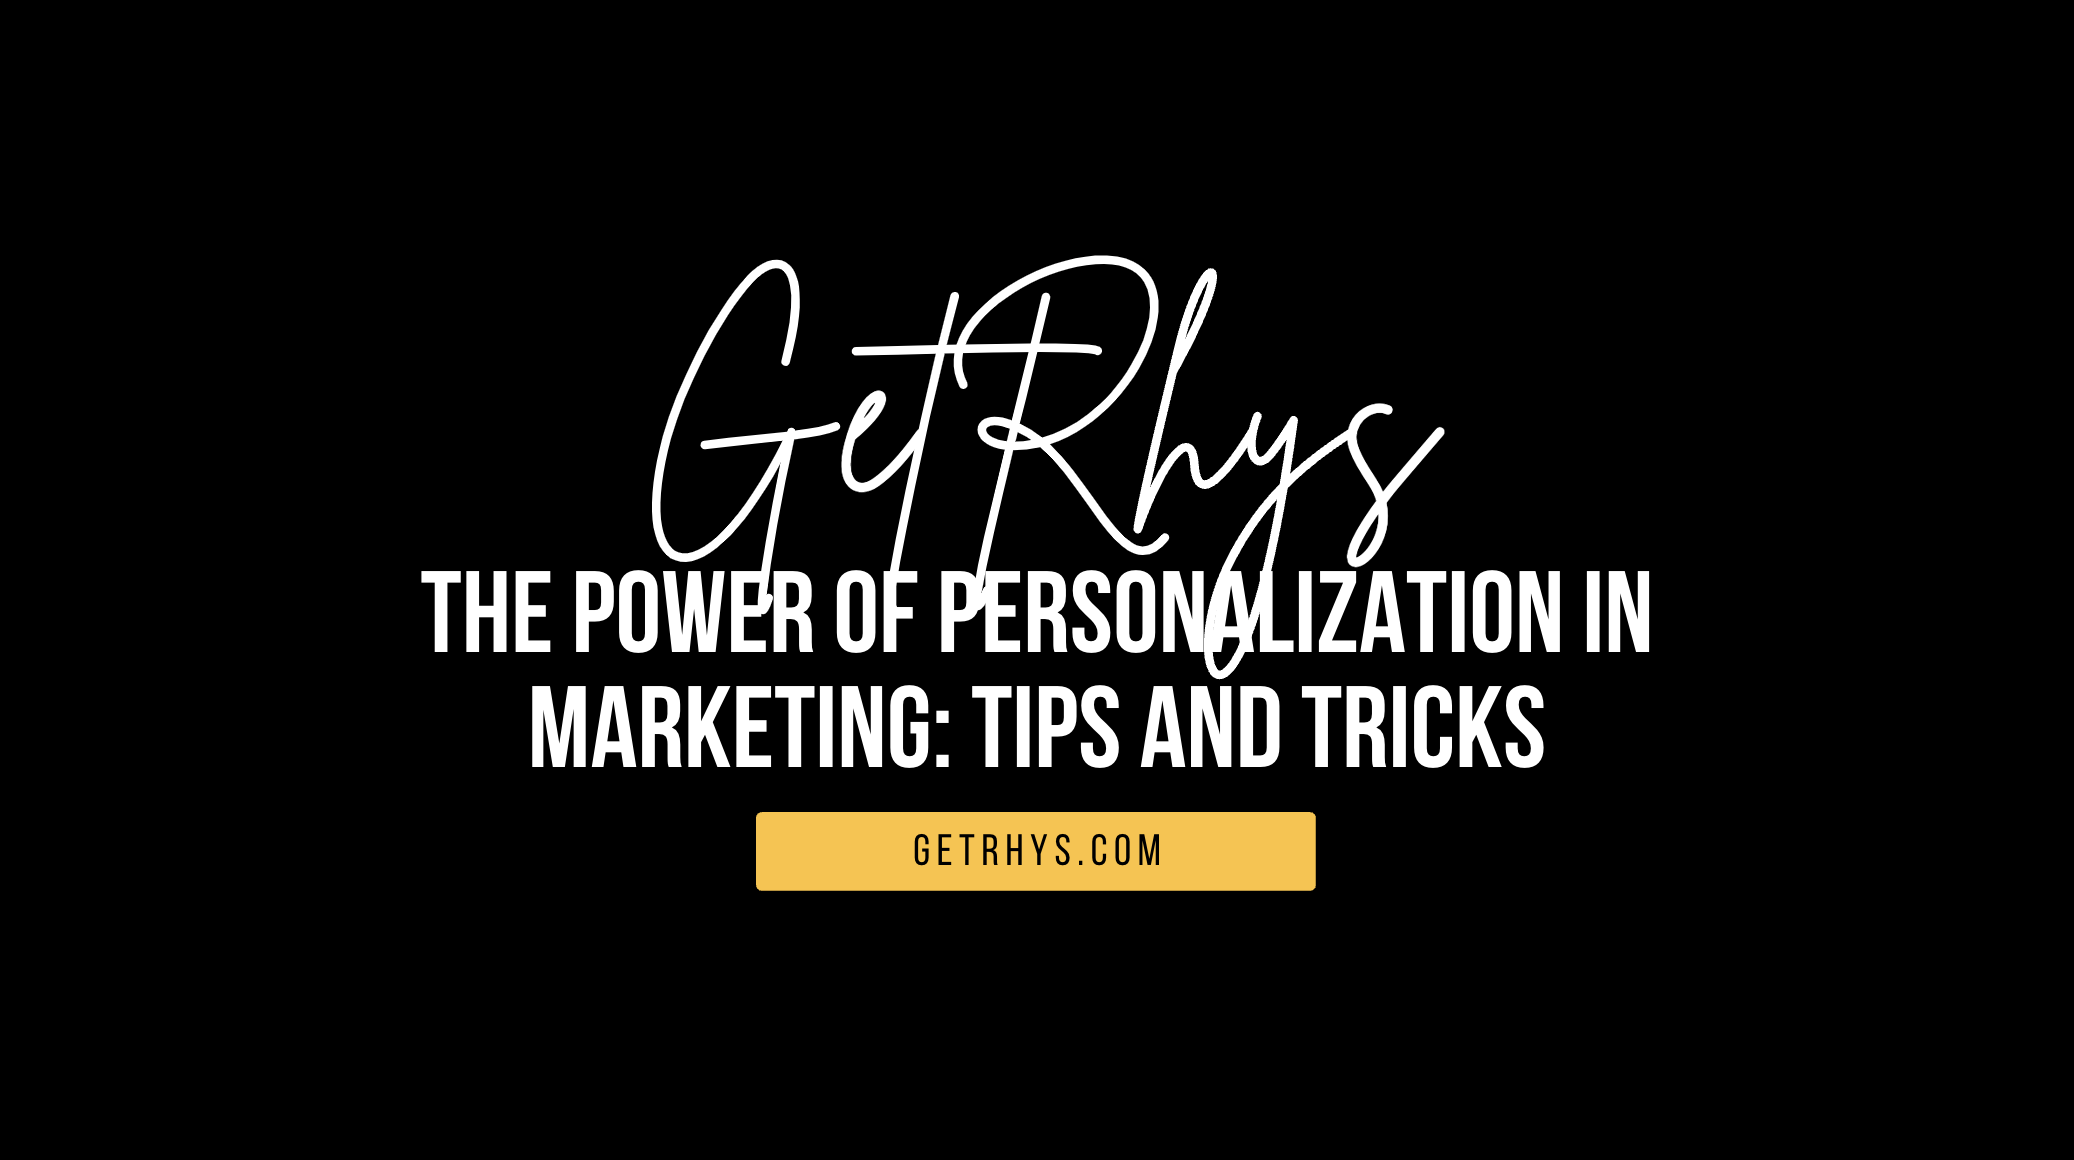 The Power of Personalization in Marketing: Tips and Tricks